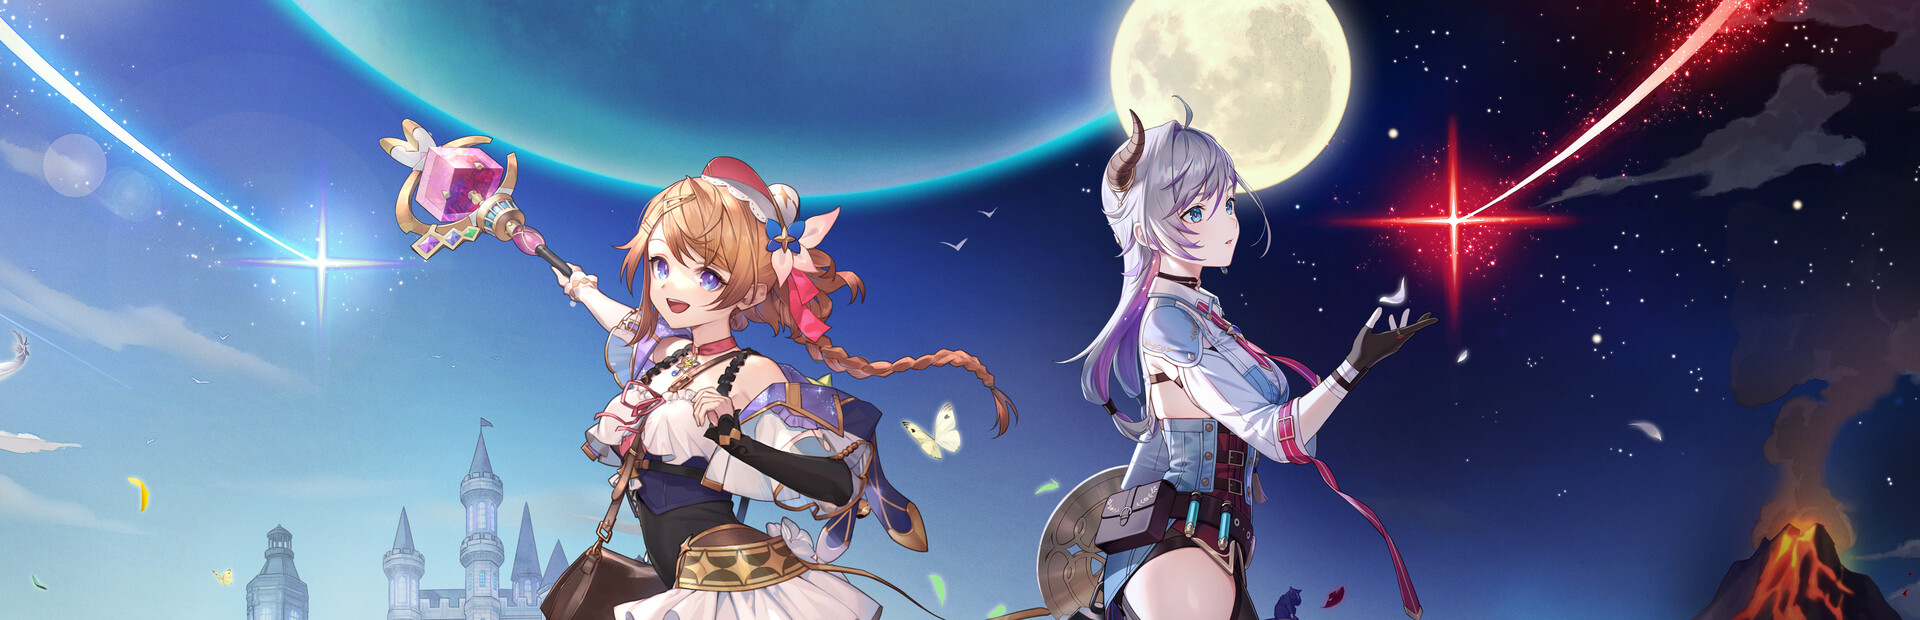 Atelier Resleriana: Forgotten Alchemy and the Polar Night Liberator cover image